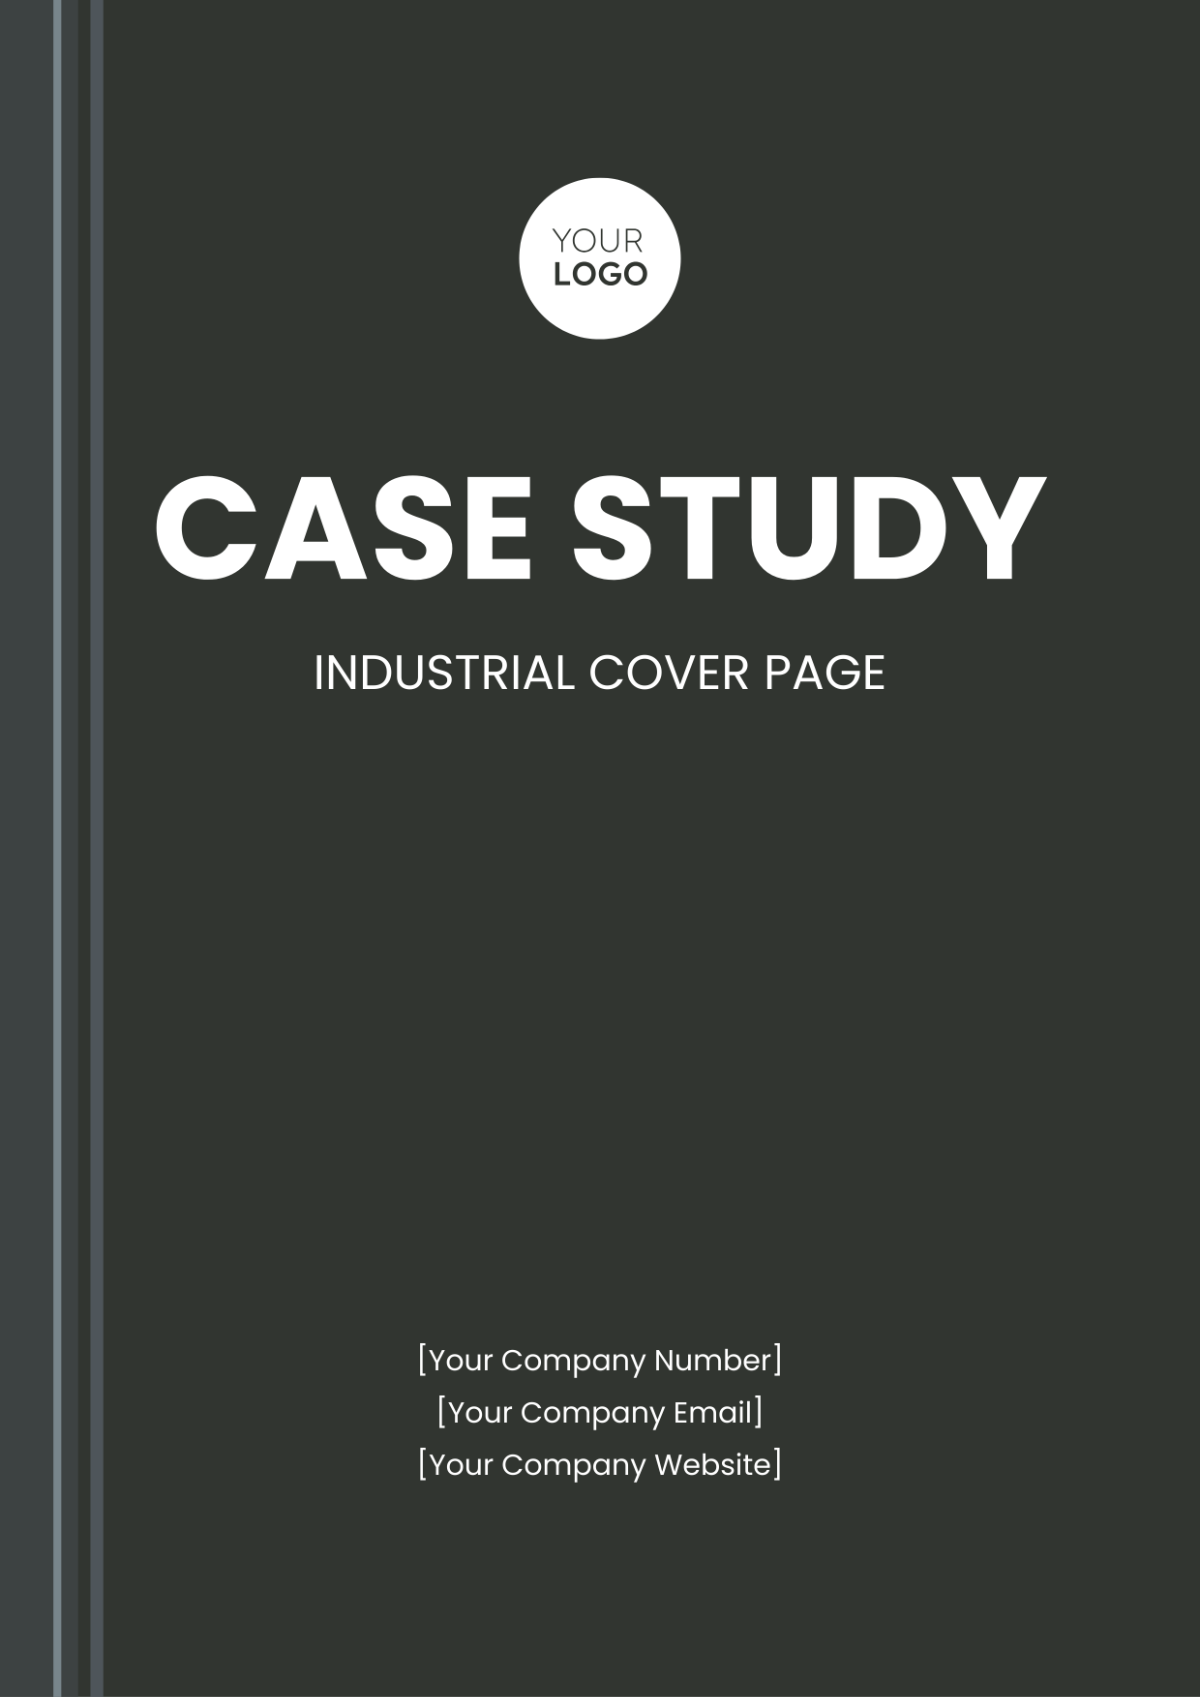 Case Study Institutional Cover Page